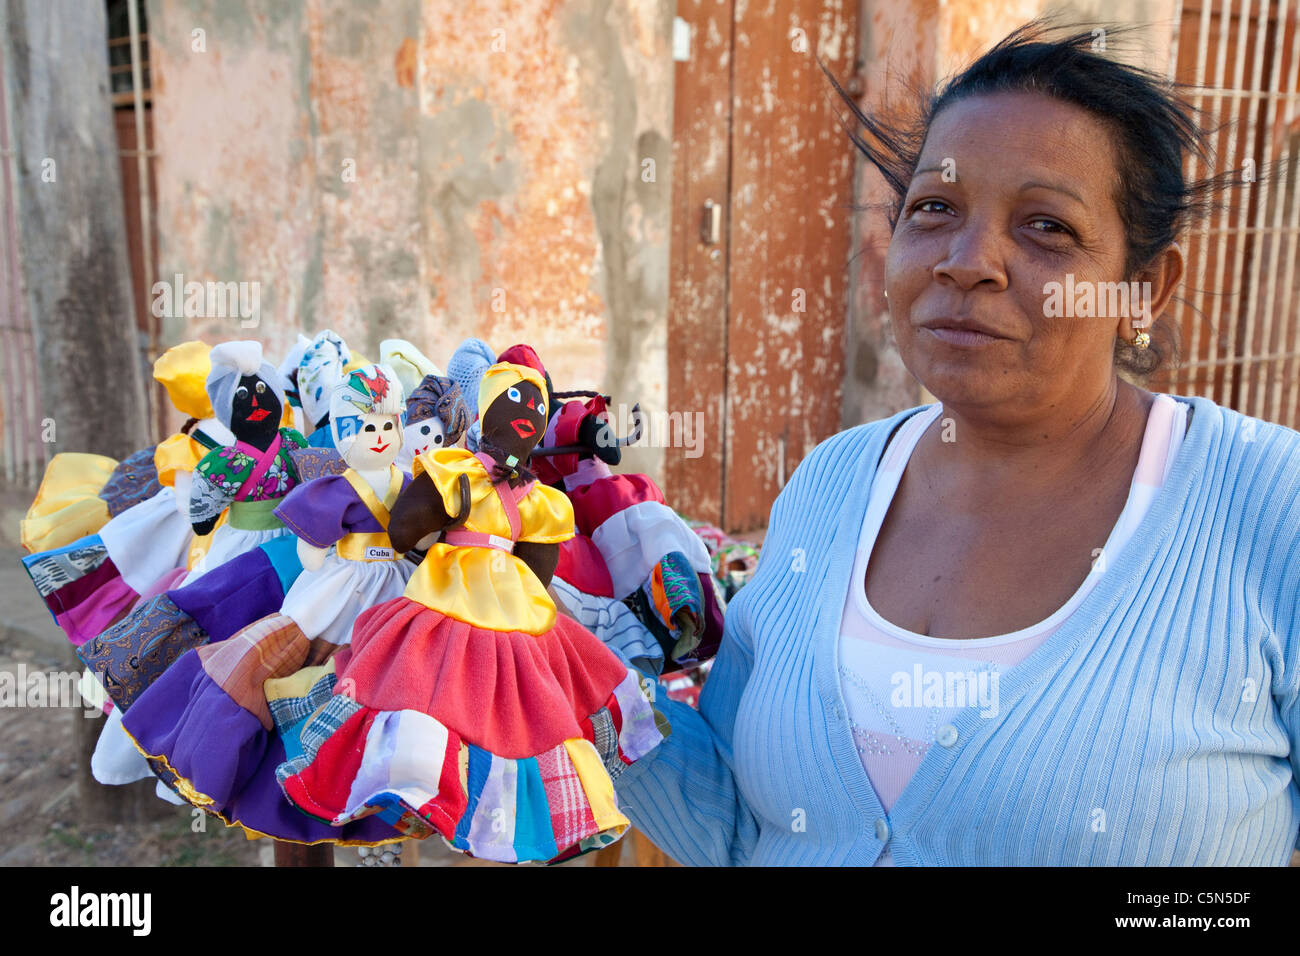 Cuba, Trinidad. Lady with Hand-made Dolls in Handicrafts Market. Stock Photo